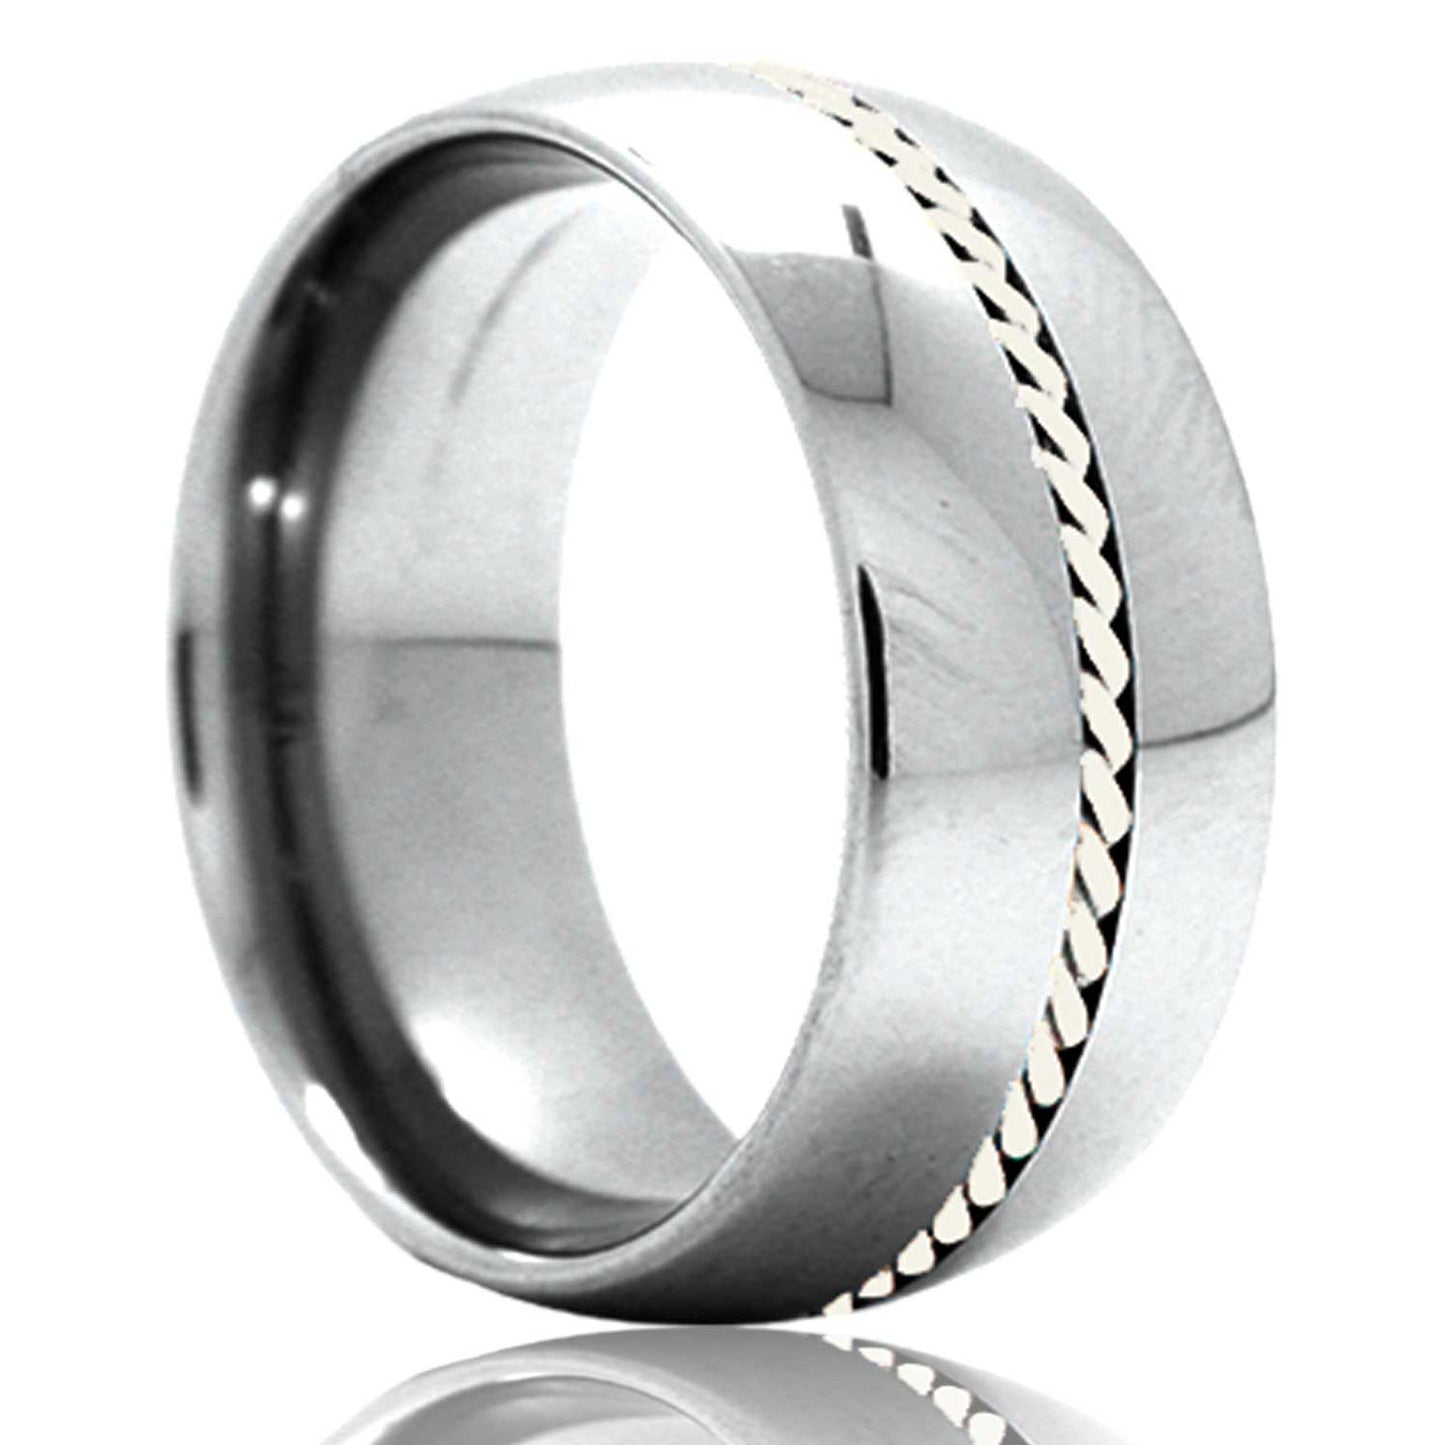 A woven platinum inlay domed tungsten wedding band displayed on a neutral white background.